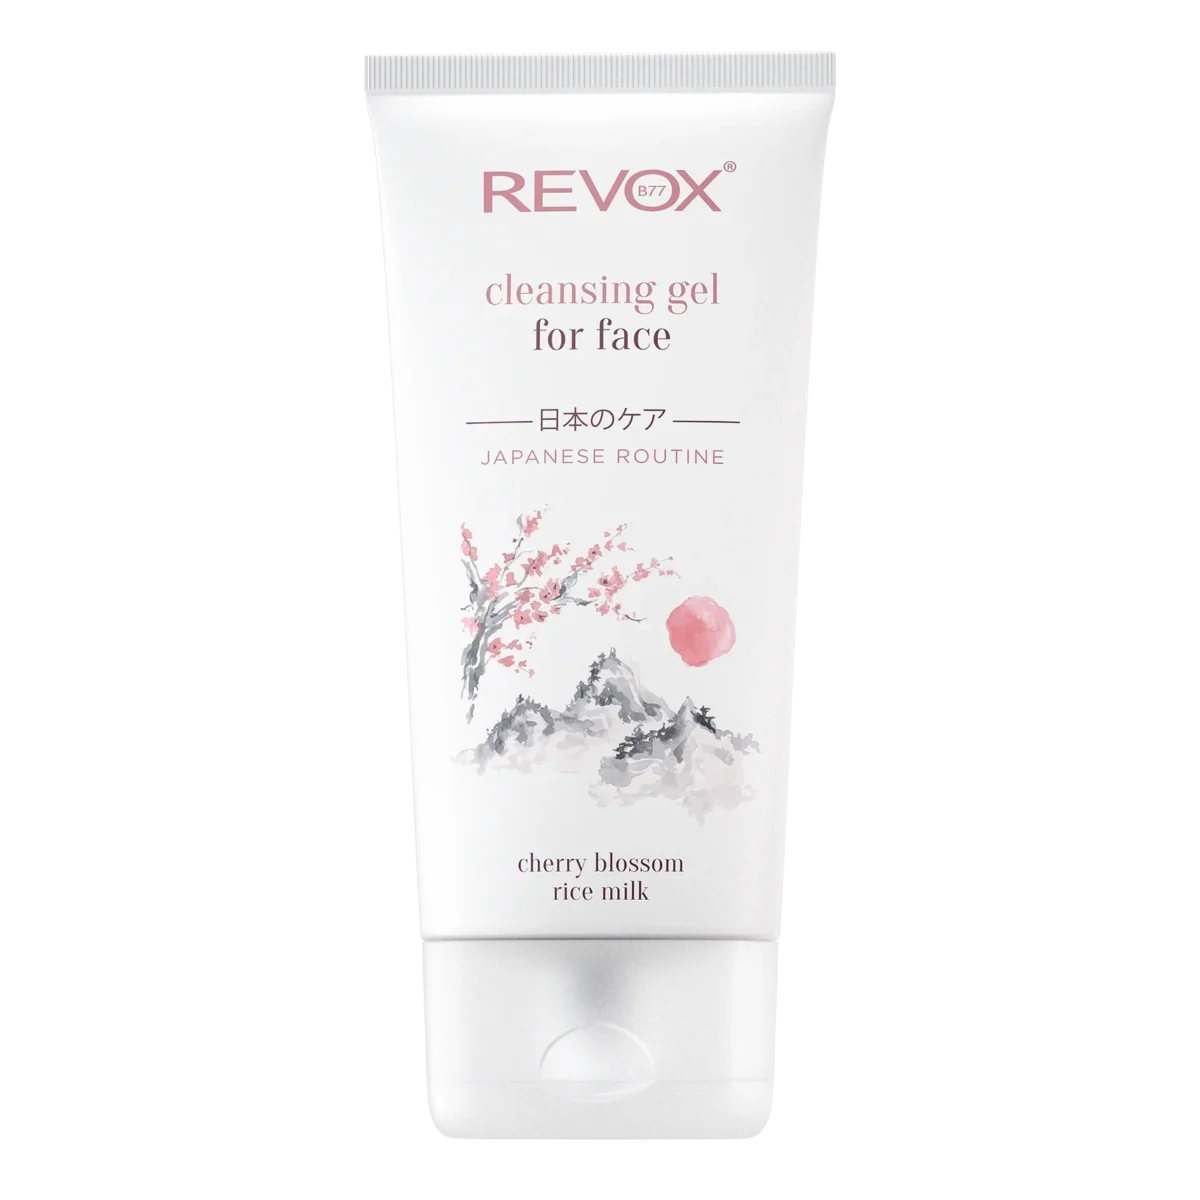 REVOX JAPANESE ROUTINE CLEANSING GEL FOR FACE, 150 ml